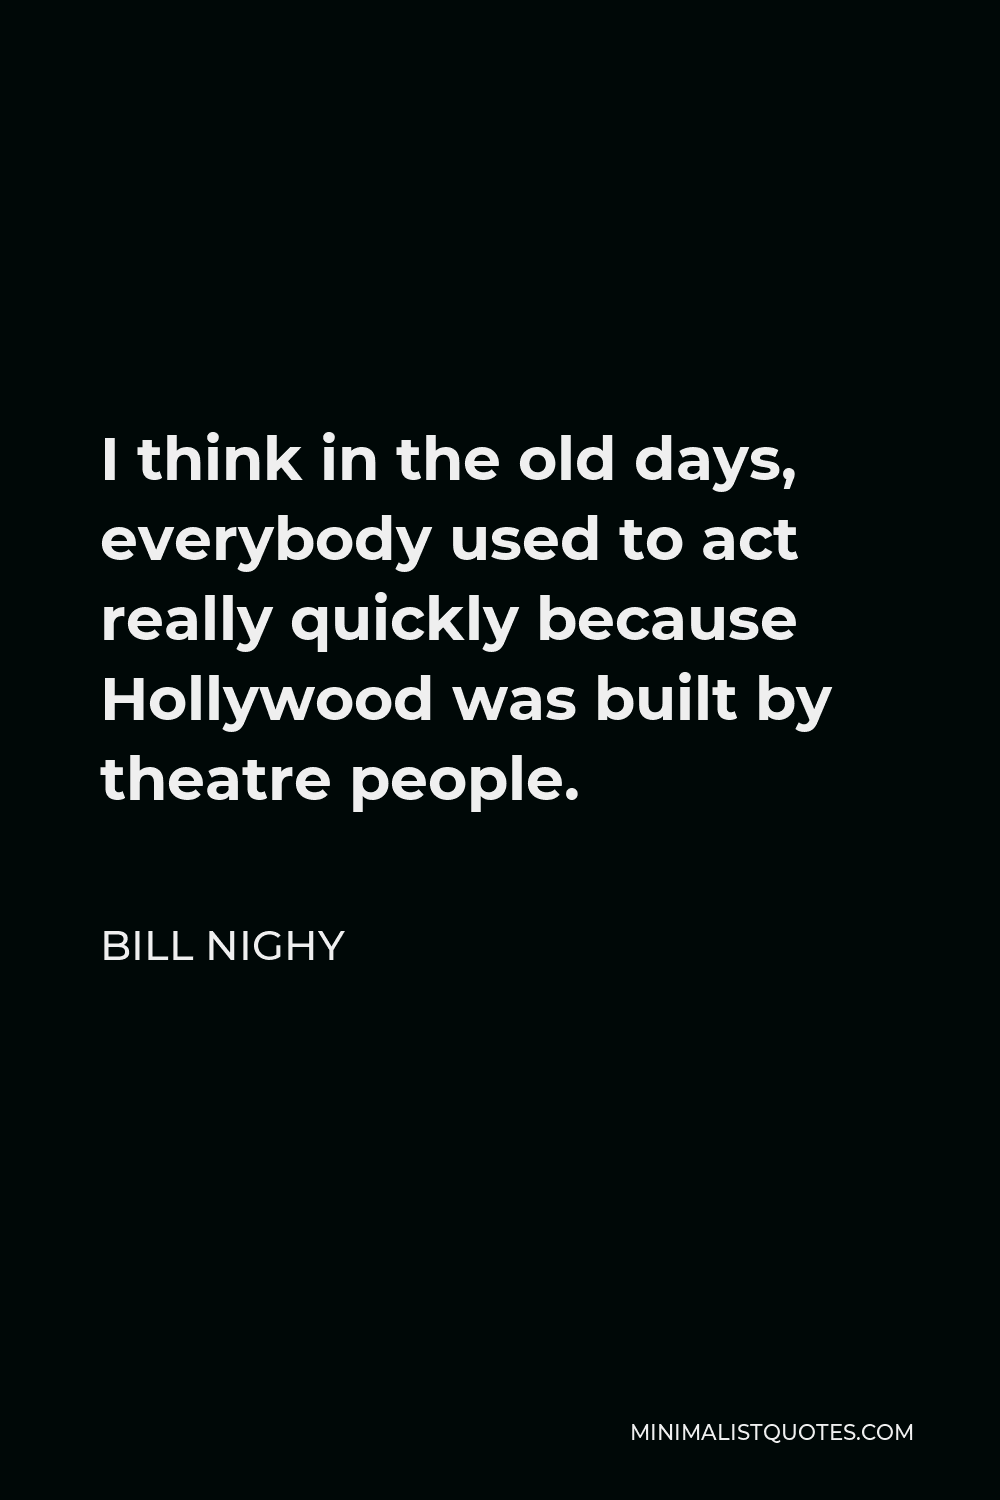 Bill Nighy Quote - I think in the old days, everybody used to act really quickly because Hollywood was built by theatre people.